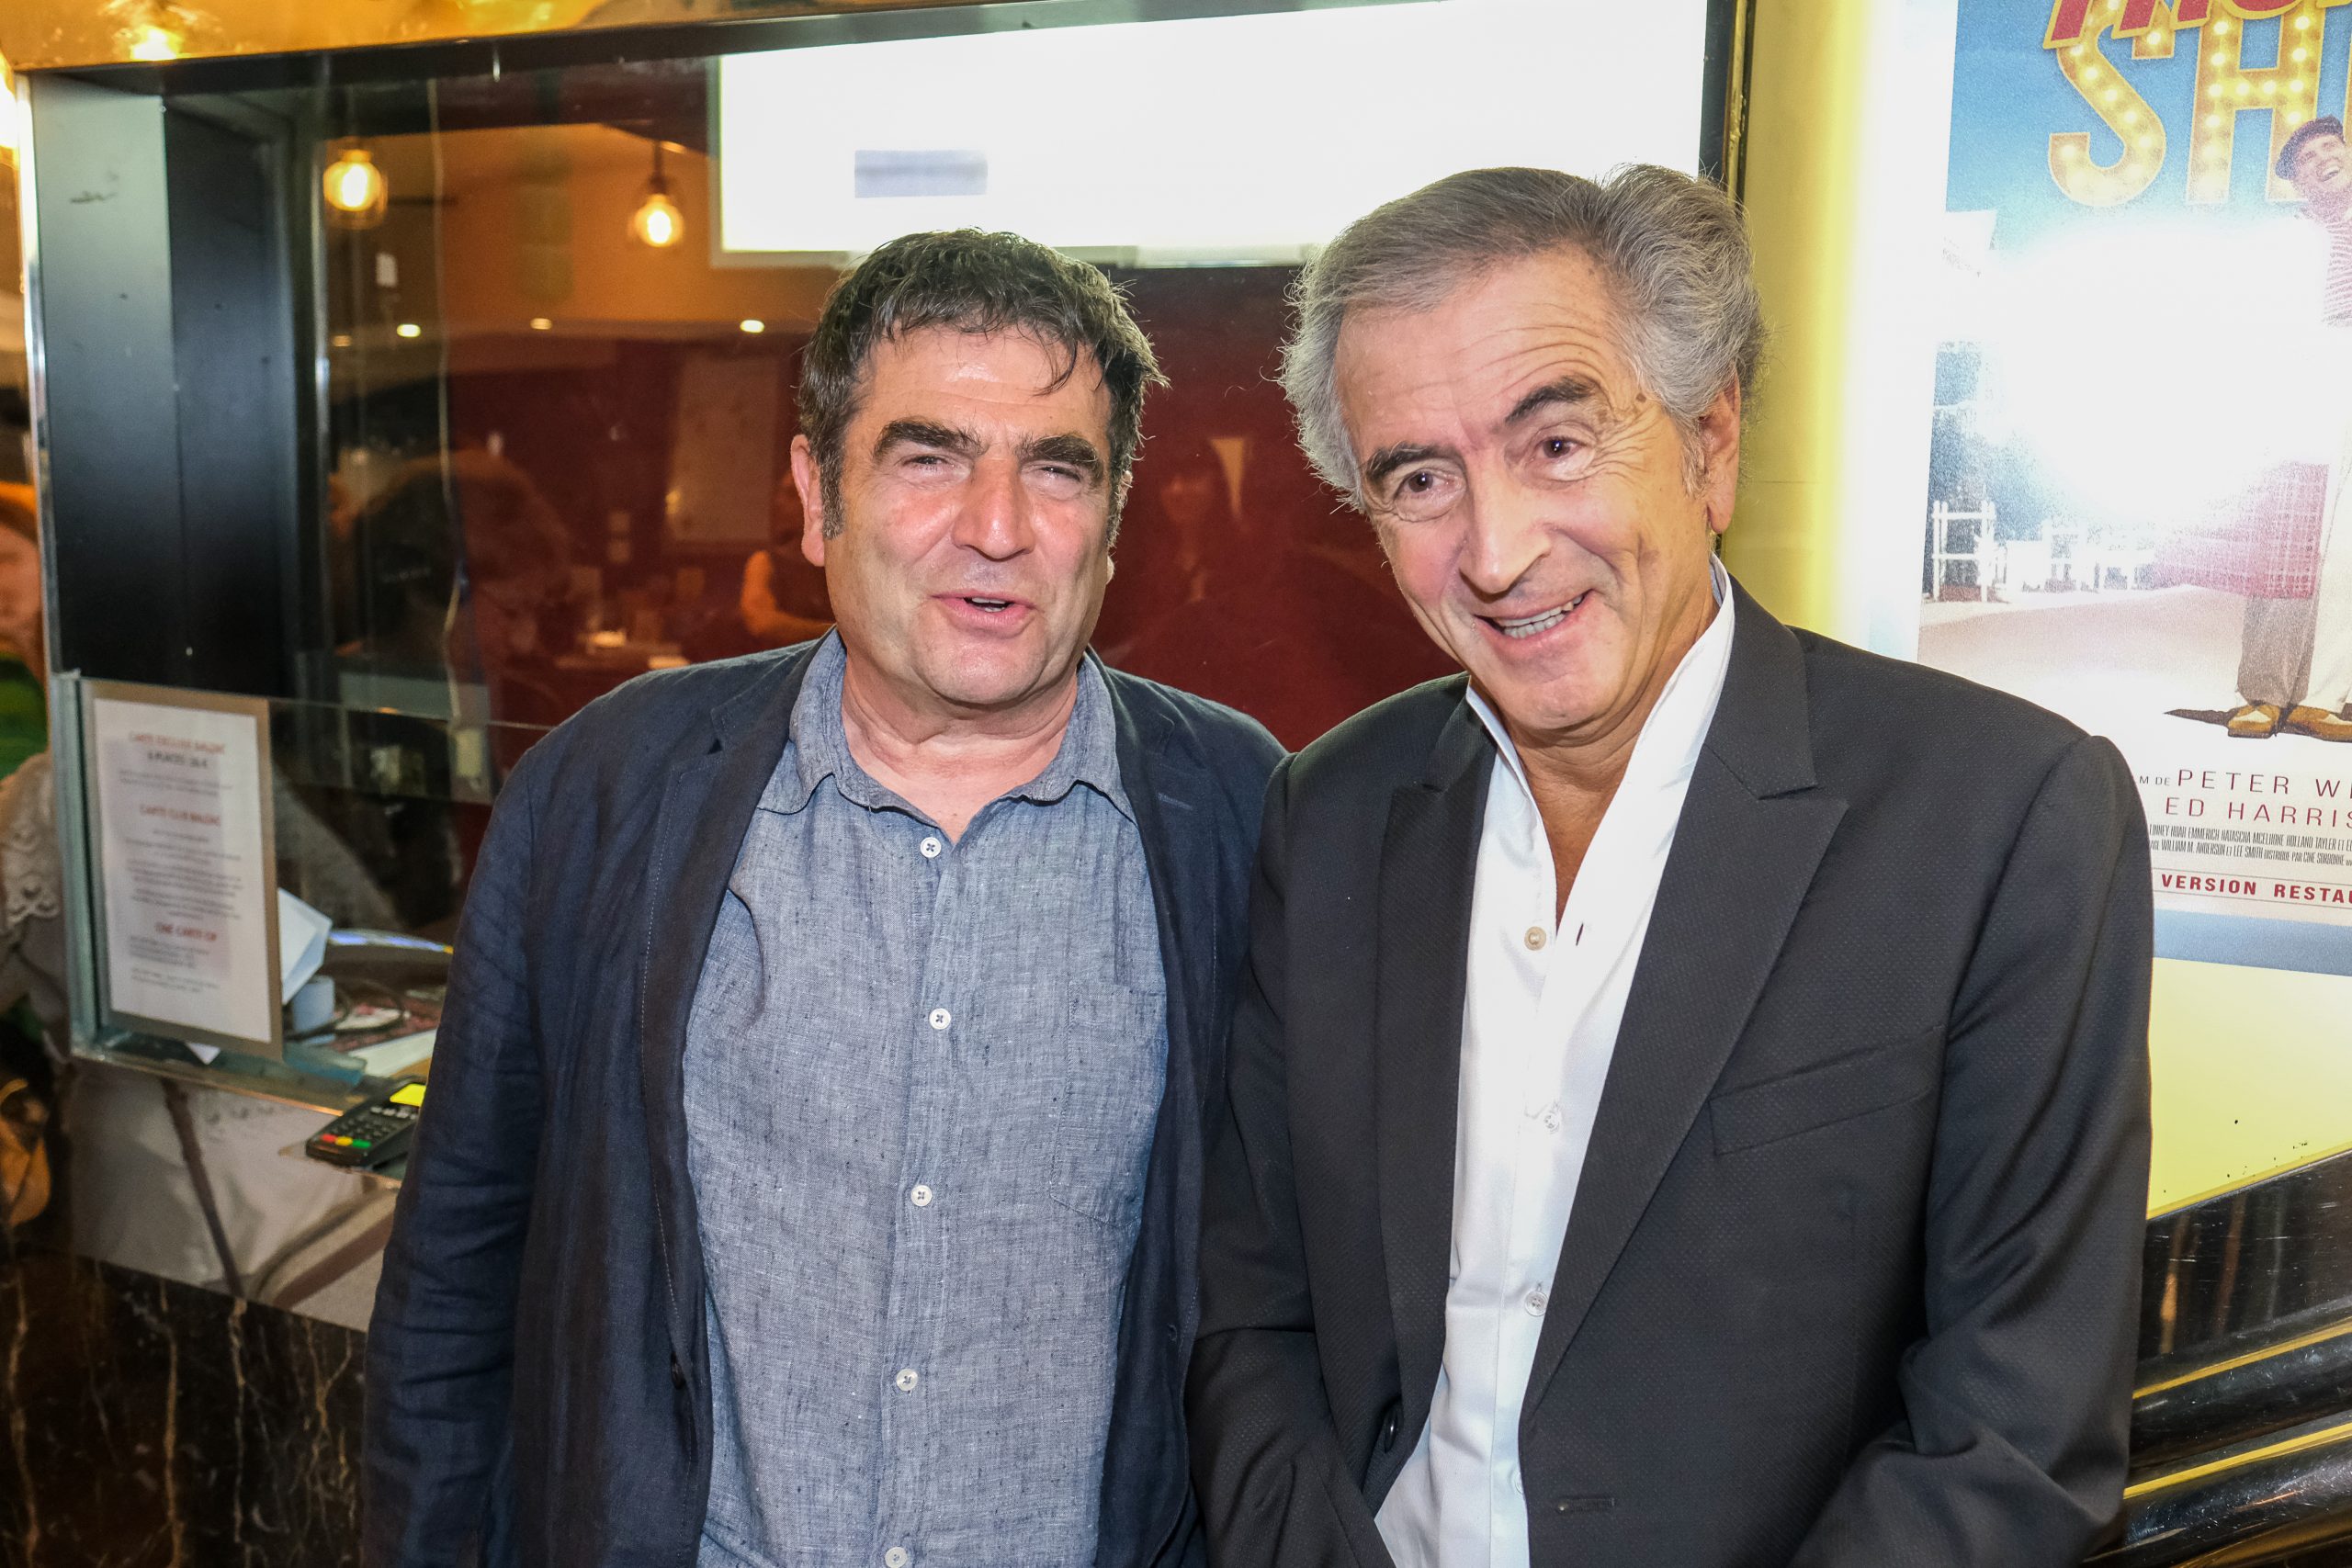 Bernard-Henri Lévy and Romain Goupil, during the preview of BHL's film "Why Ukraine", at the Cinema Le Balzac in Paris.